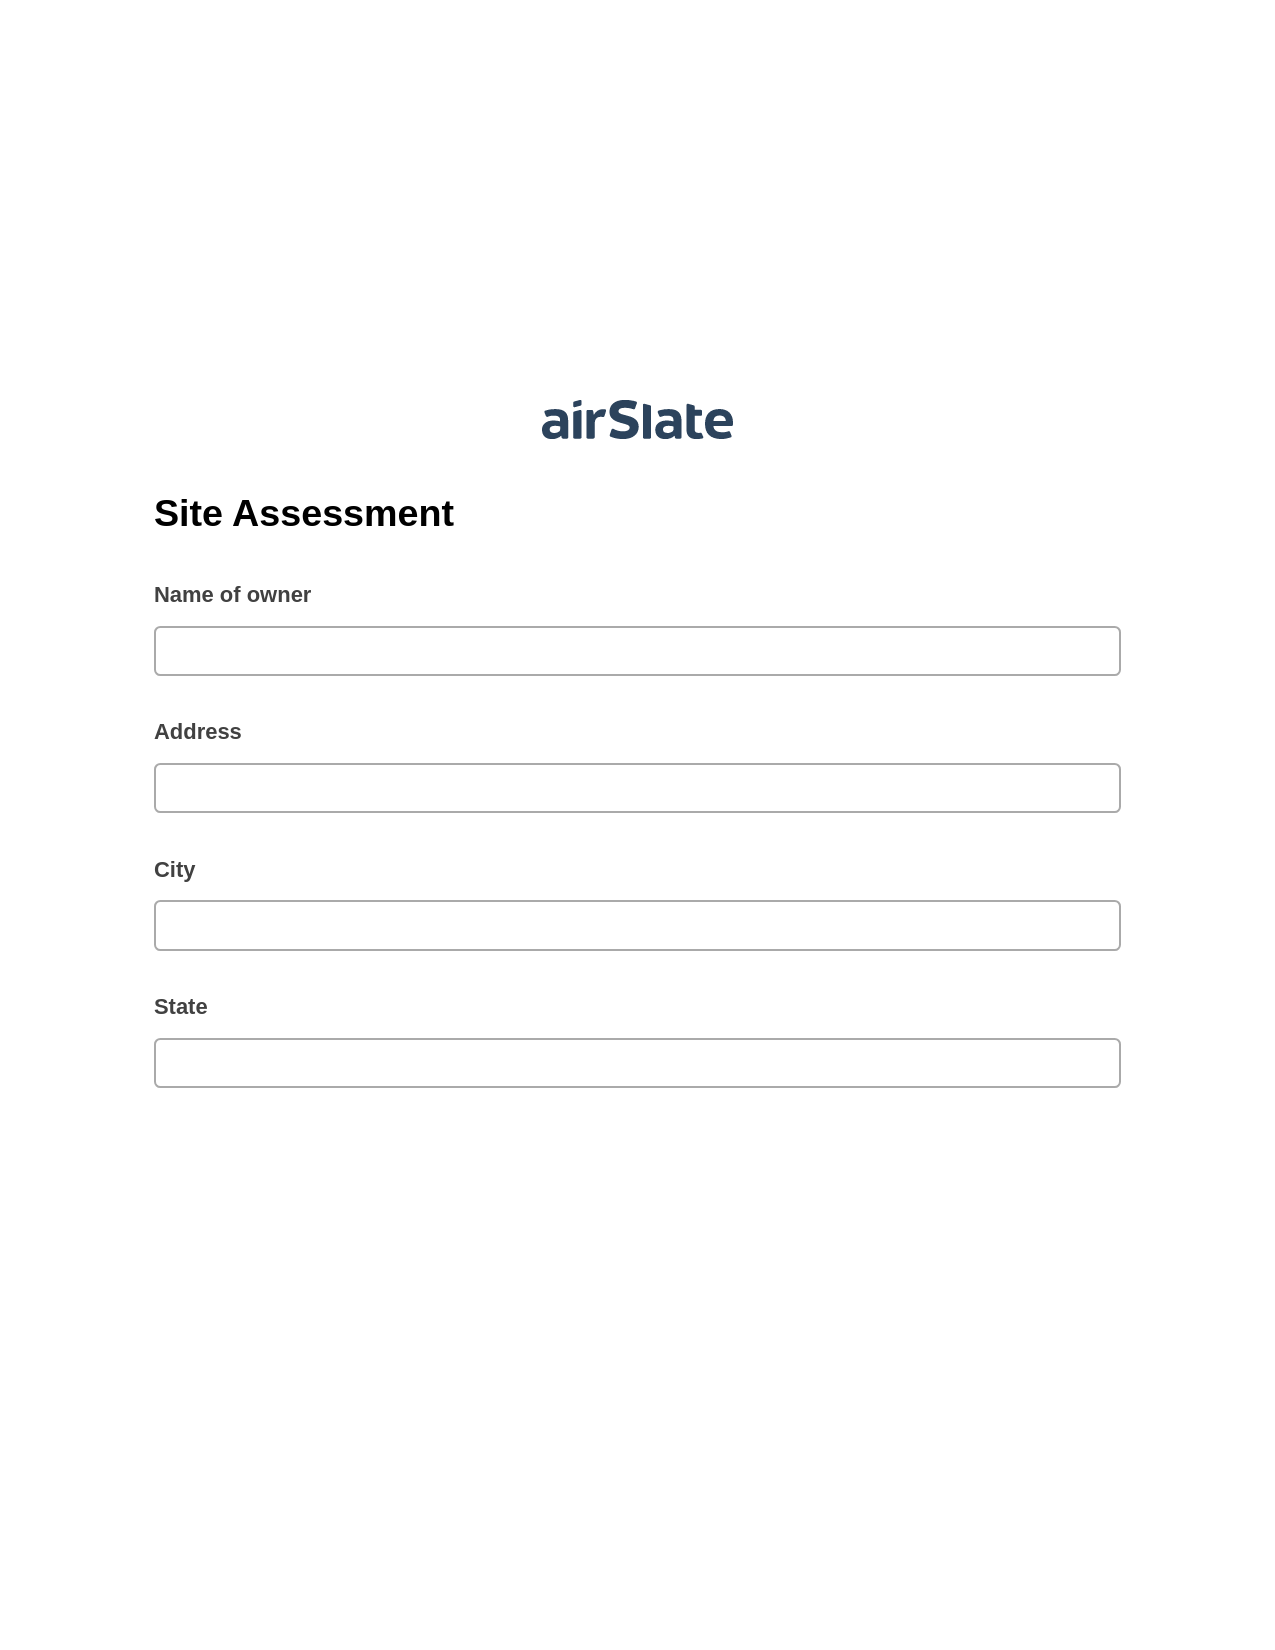 Multirole Site Assessment Pre-fill from Google Sheets Bot, Reminder Bot, Post-finish Document Bot